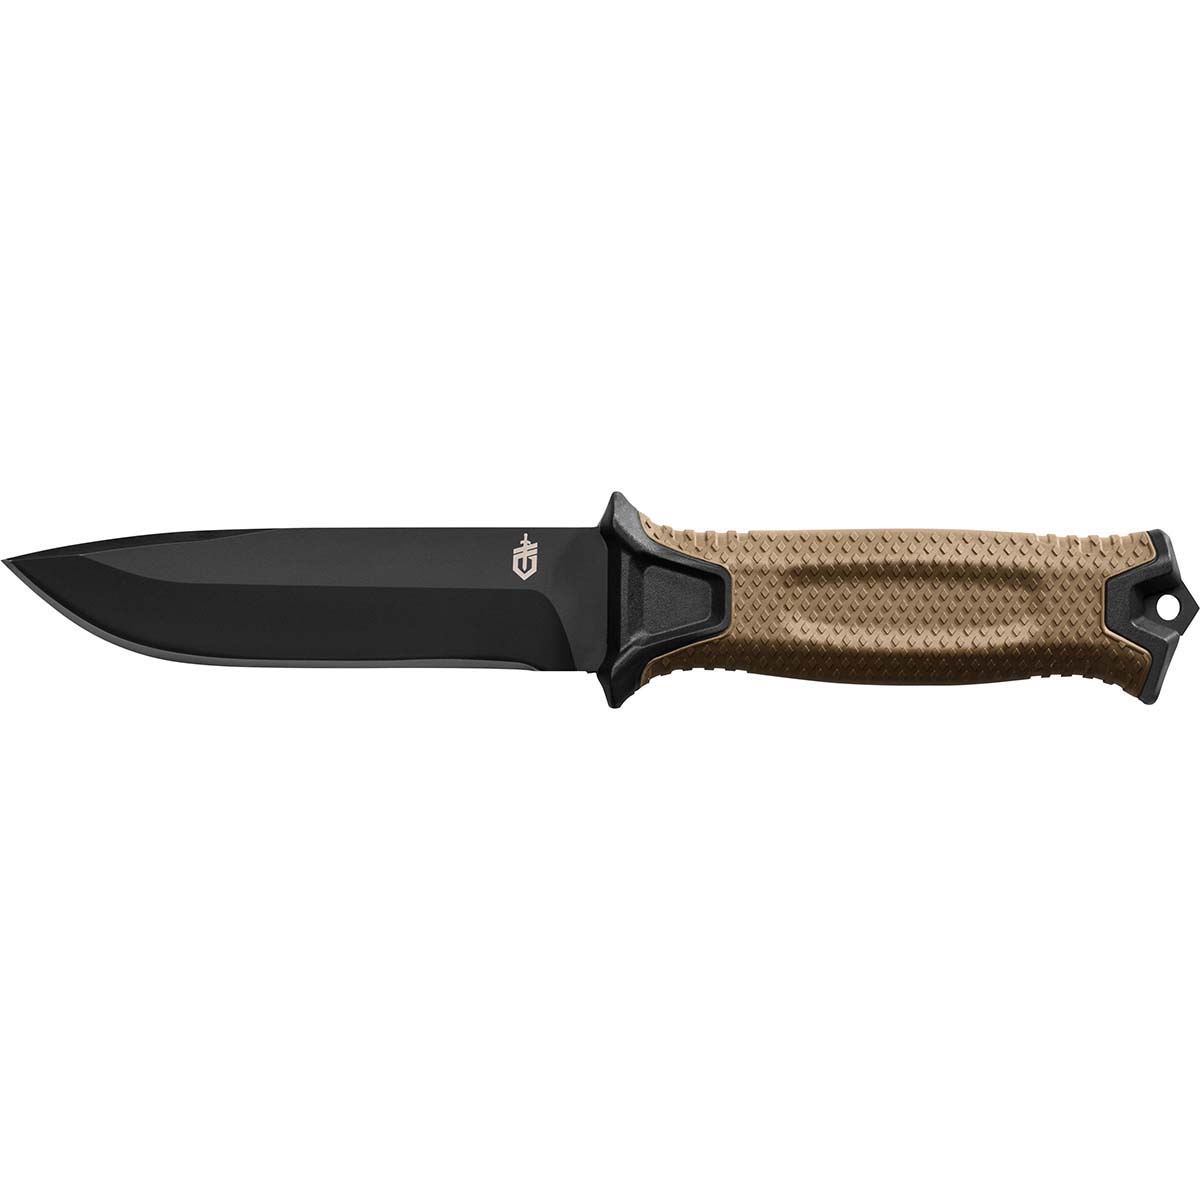 Gerber Strongarm Fixed Blade Knife Coyote